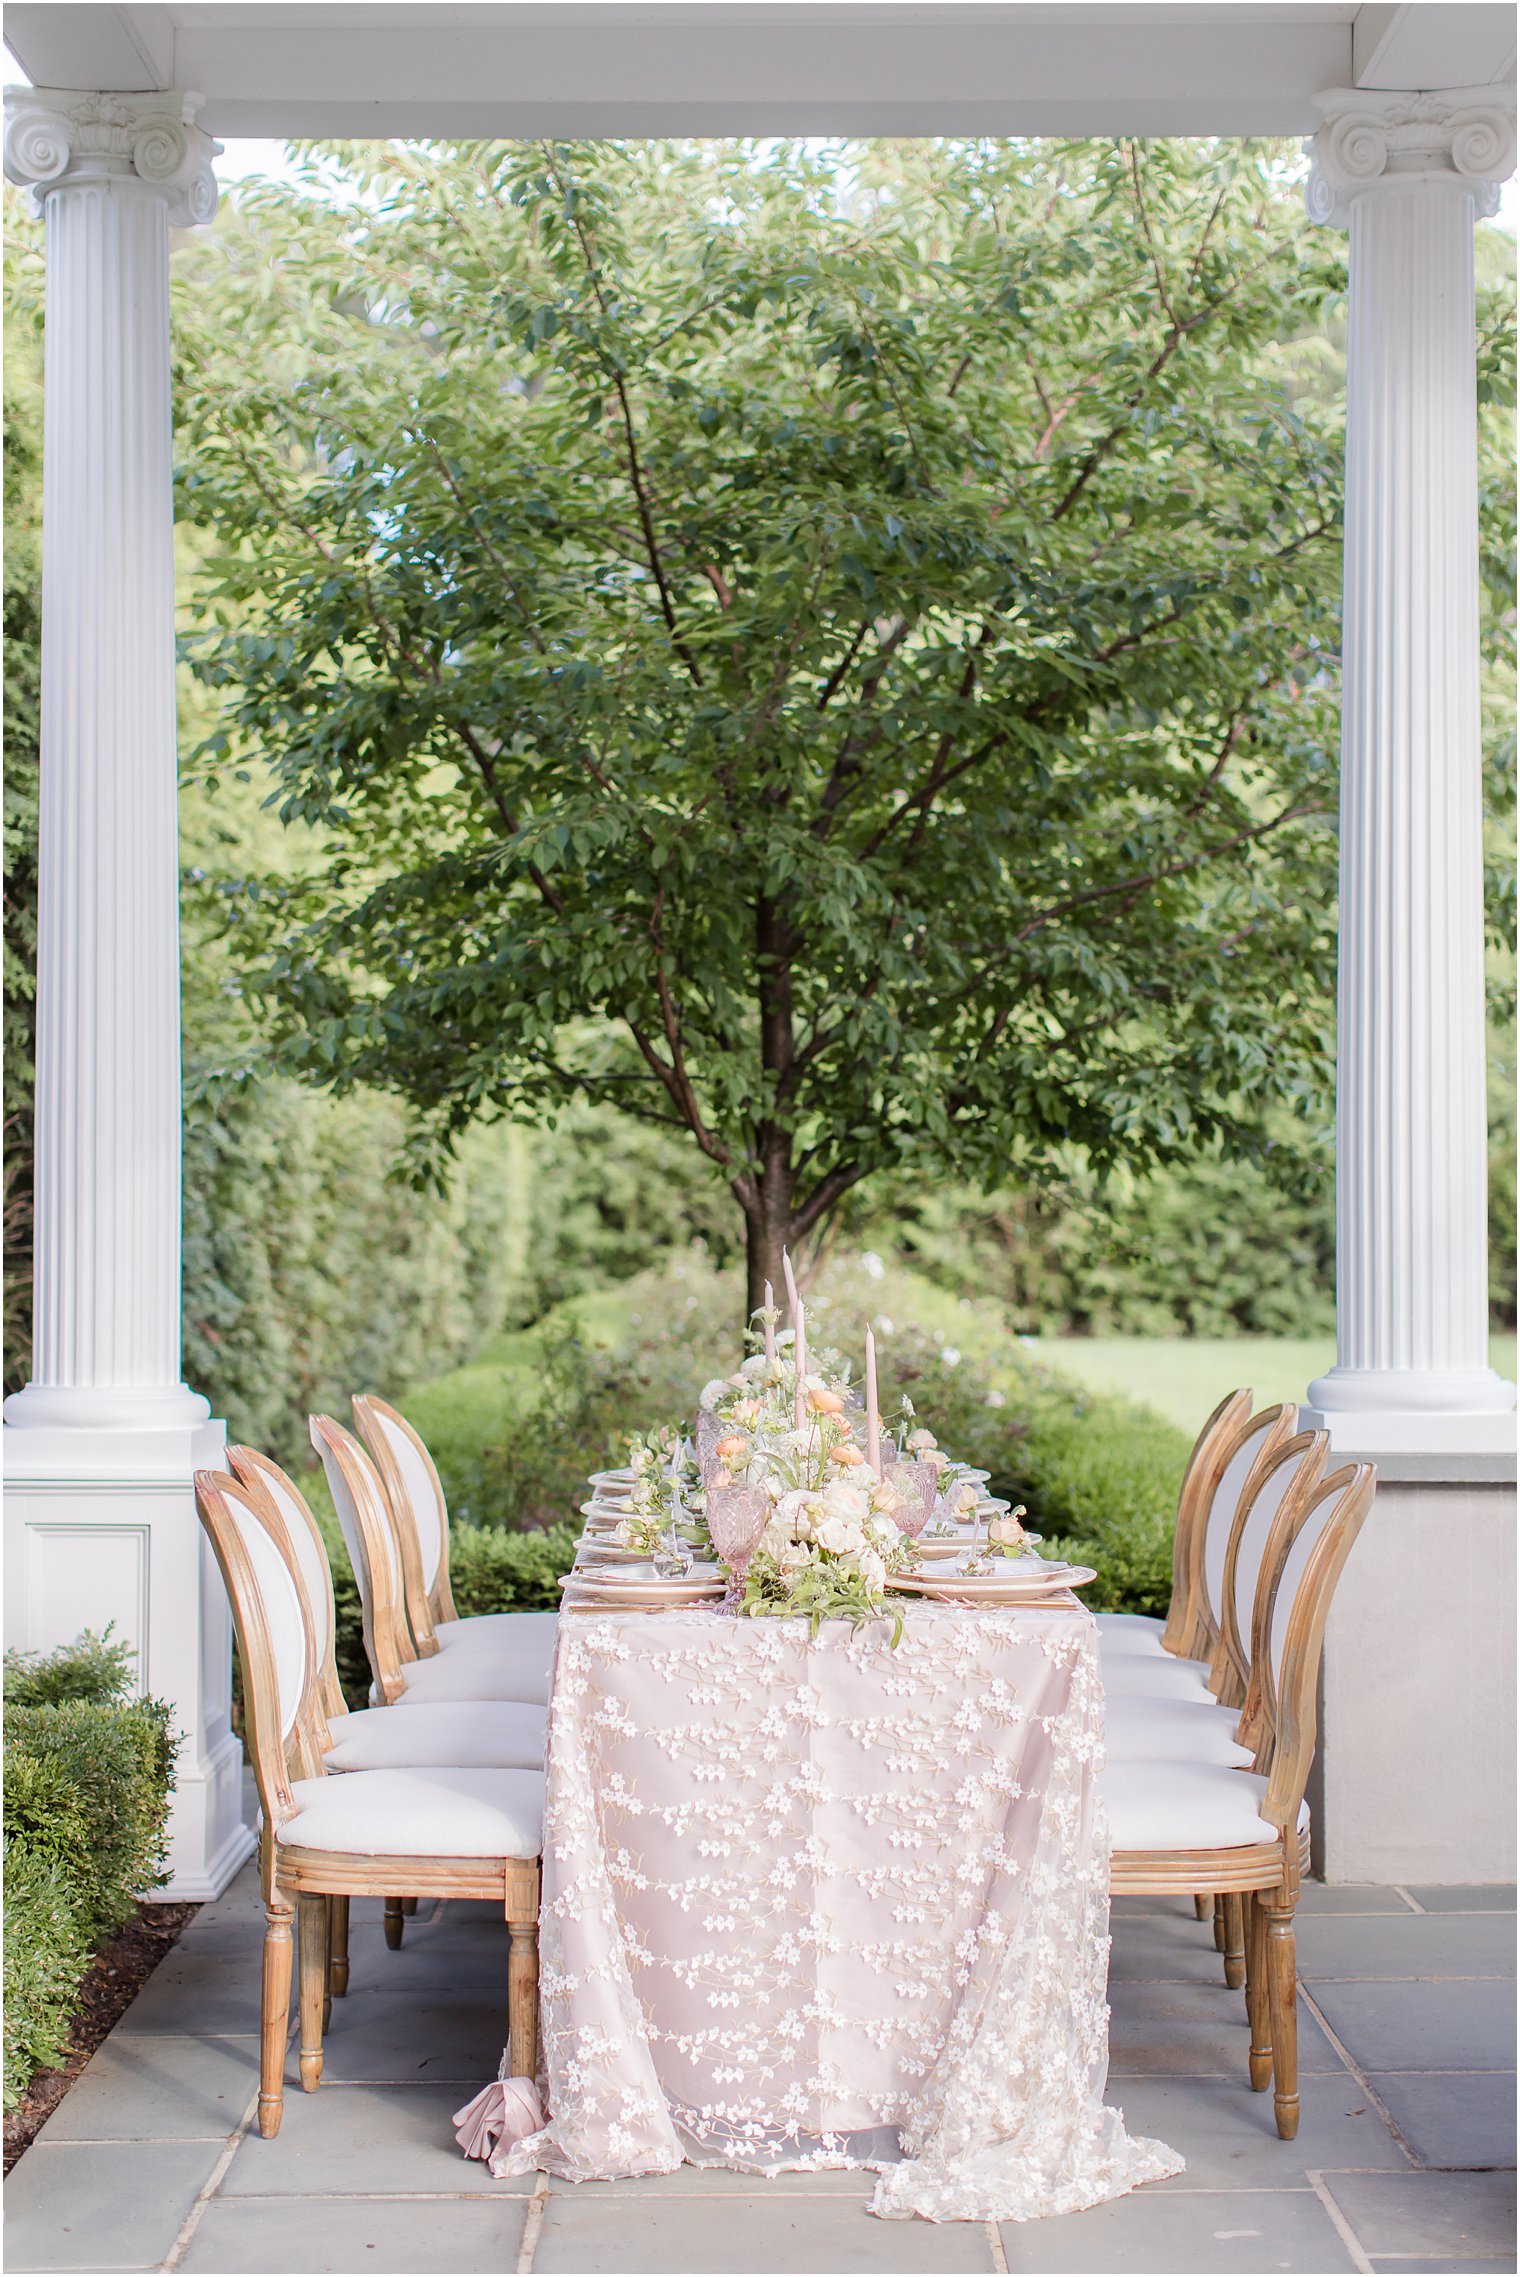 Romantic micro wedding inspiration at Park Chateau Estate and Gardens in East Brunswick, NJ